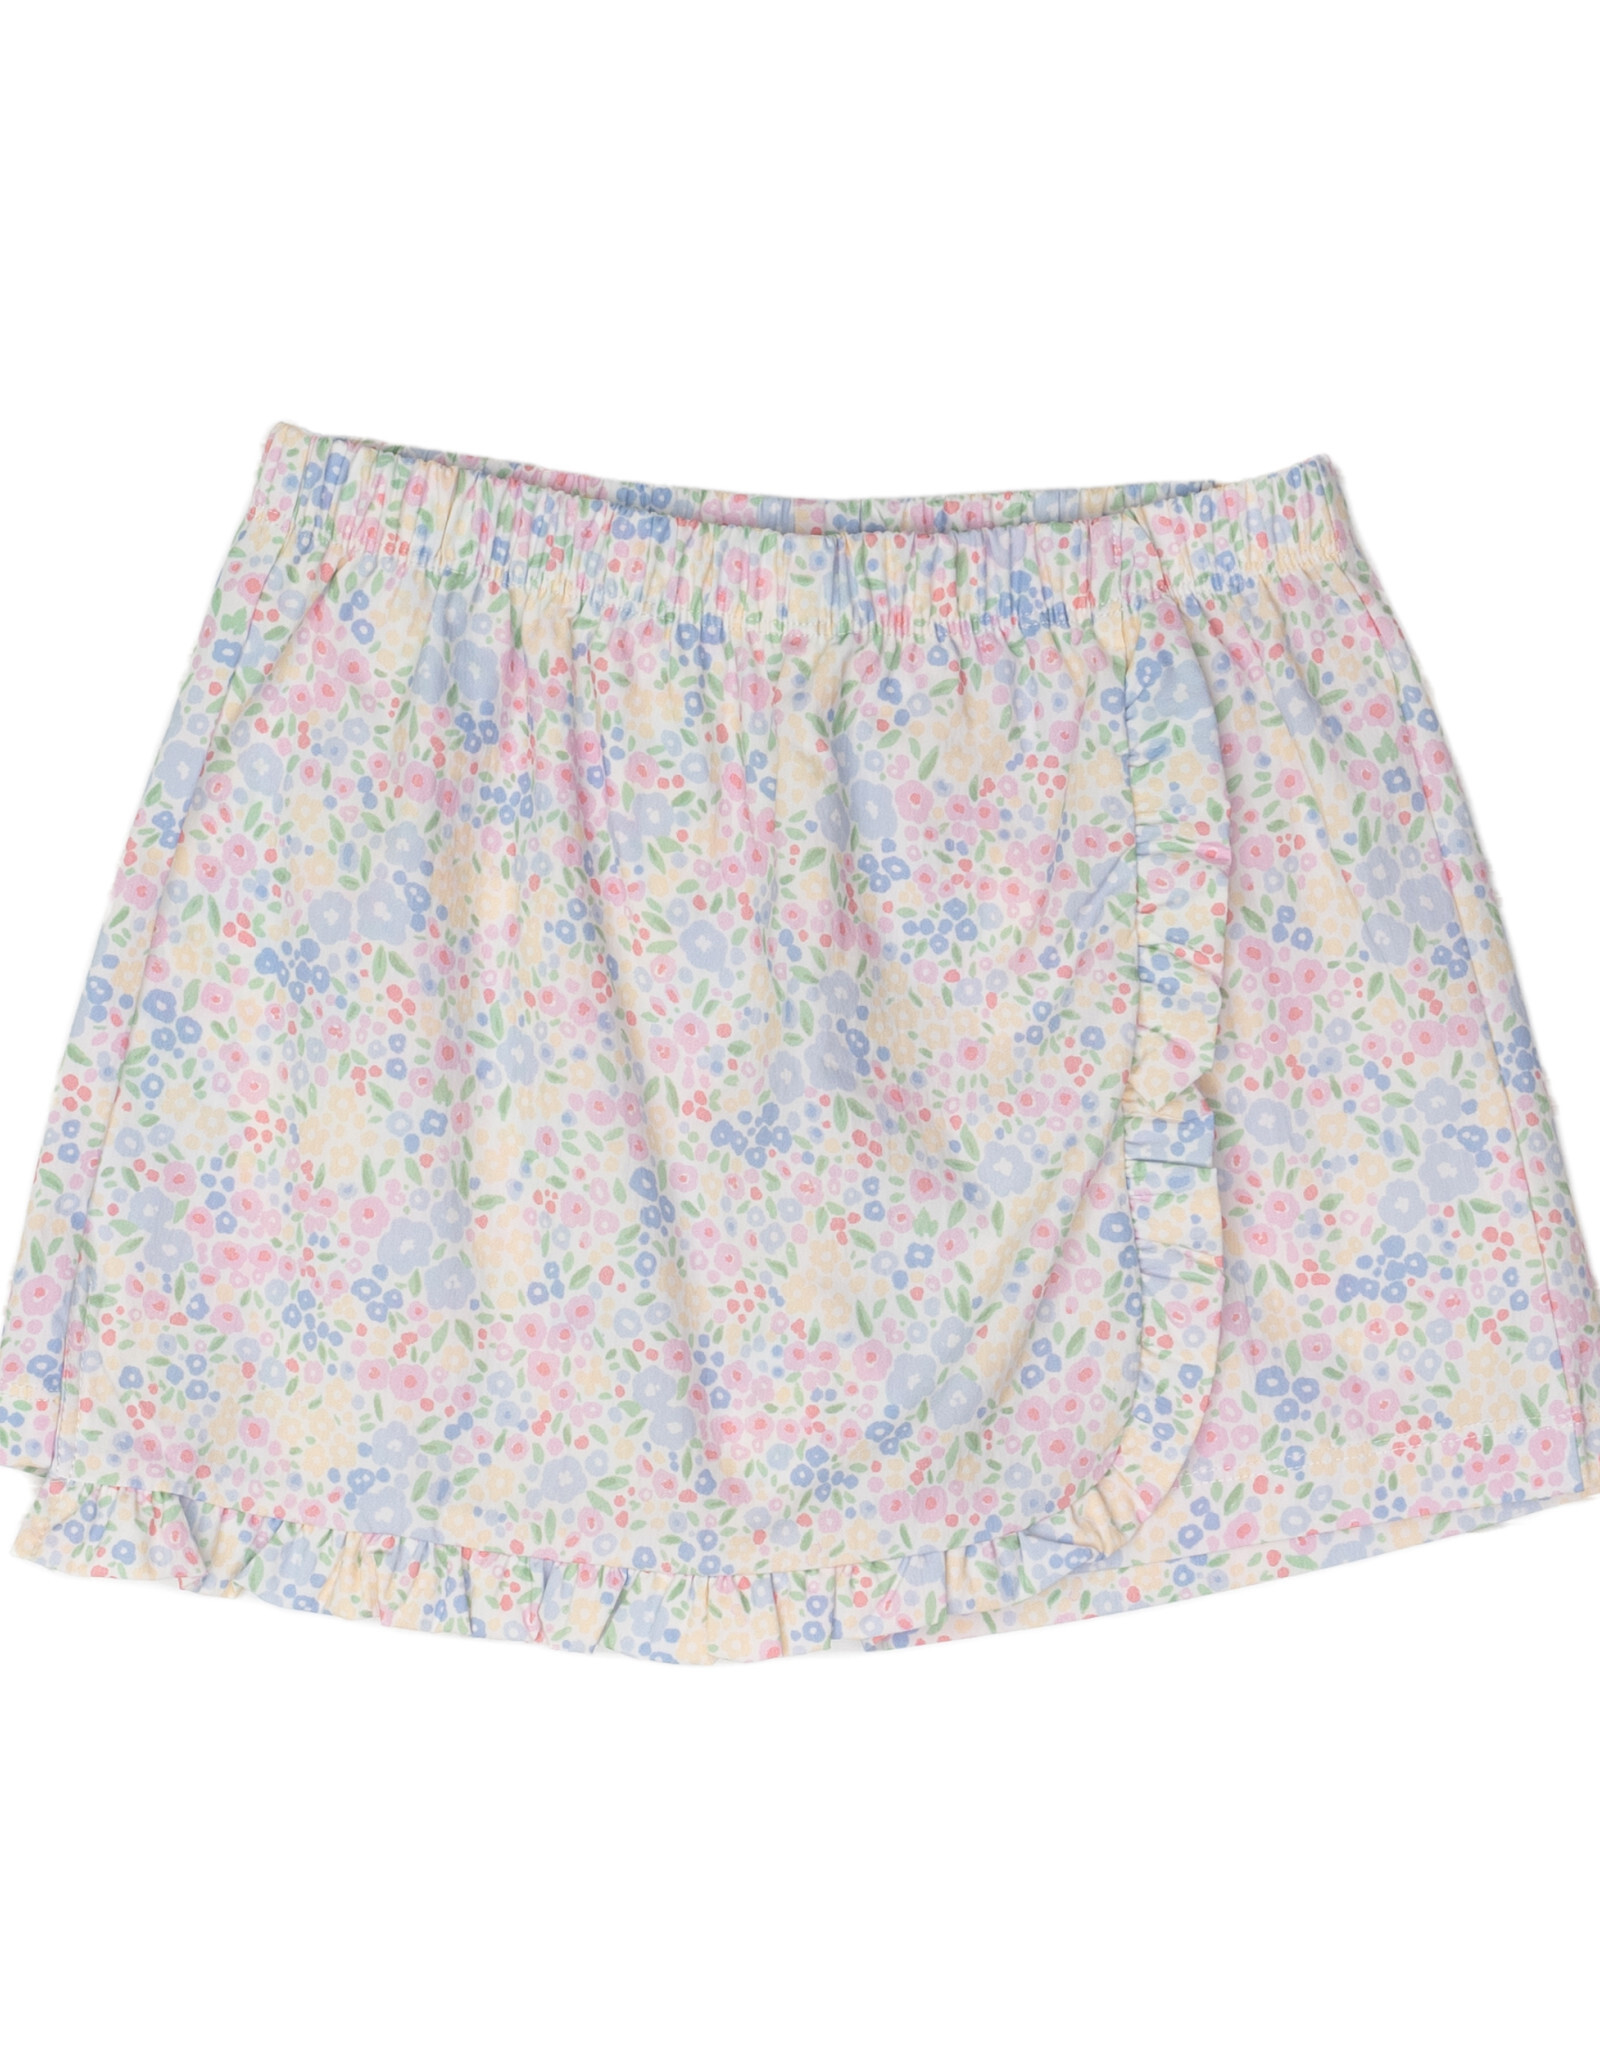 The Oaks The Brinley Skirt, Spring Floral